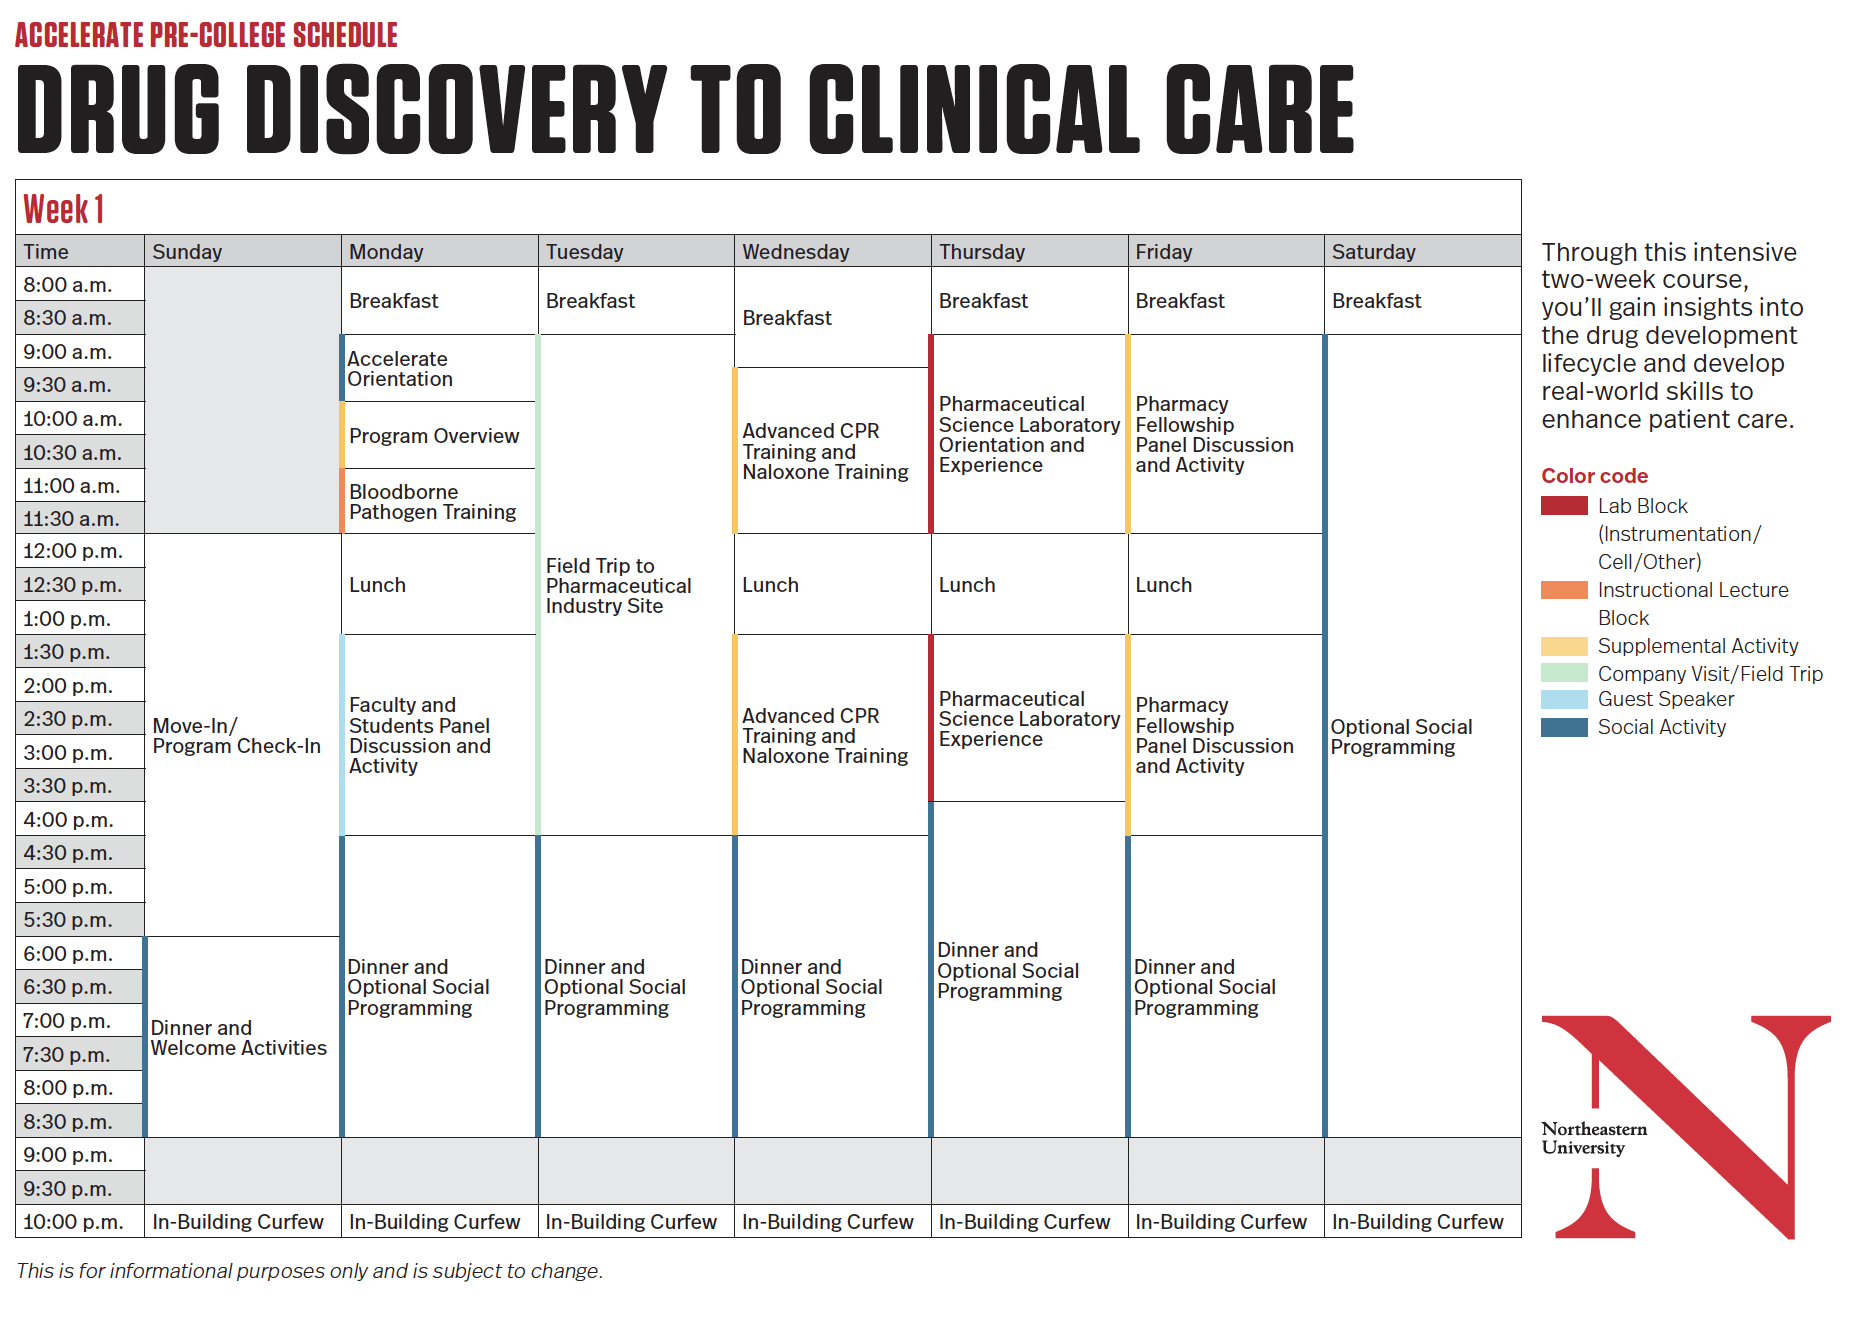 Sample schedule of the Drug Discovery to Clinical Care program